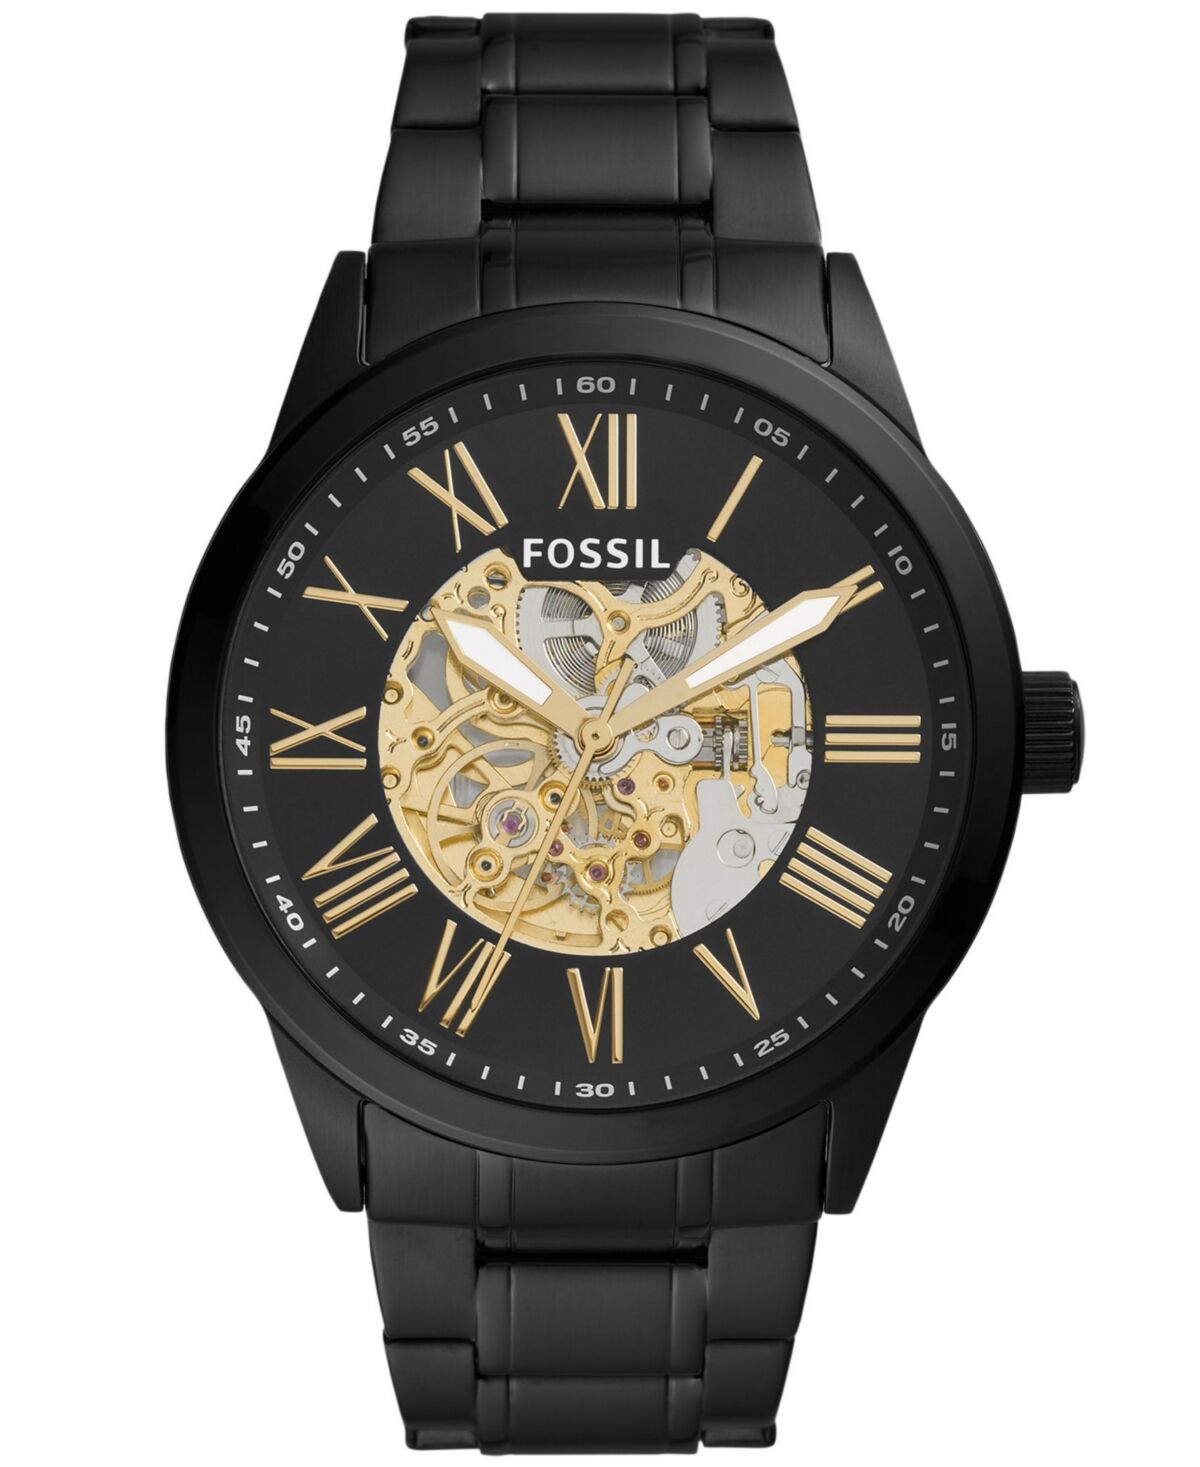 Fossil Men's Flynn Automatic Black Stainless Steel Watch 48mm - Black